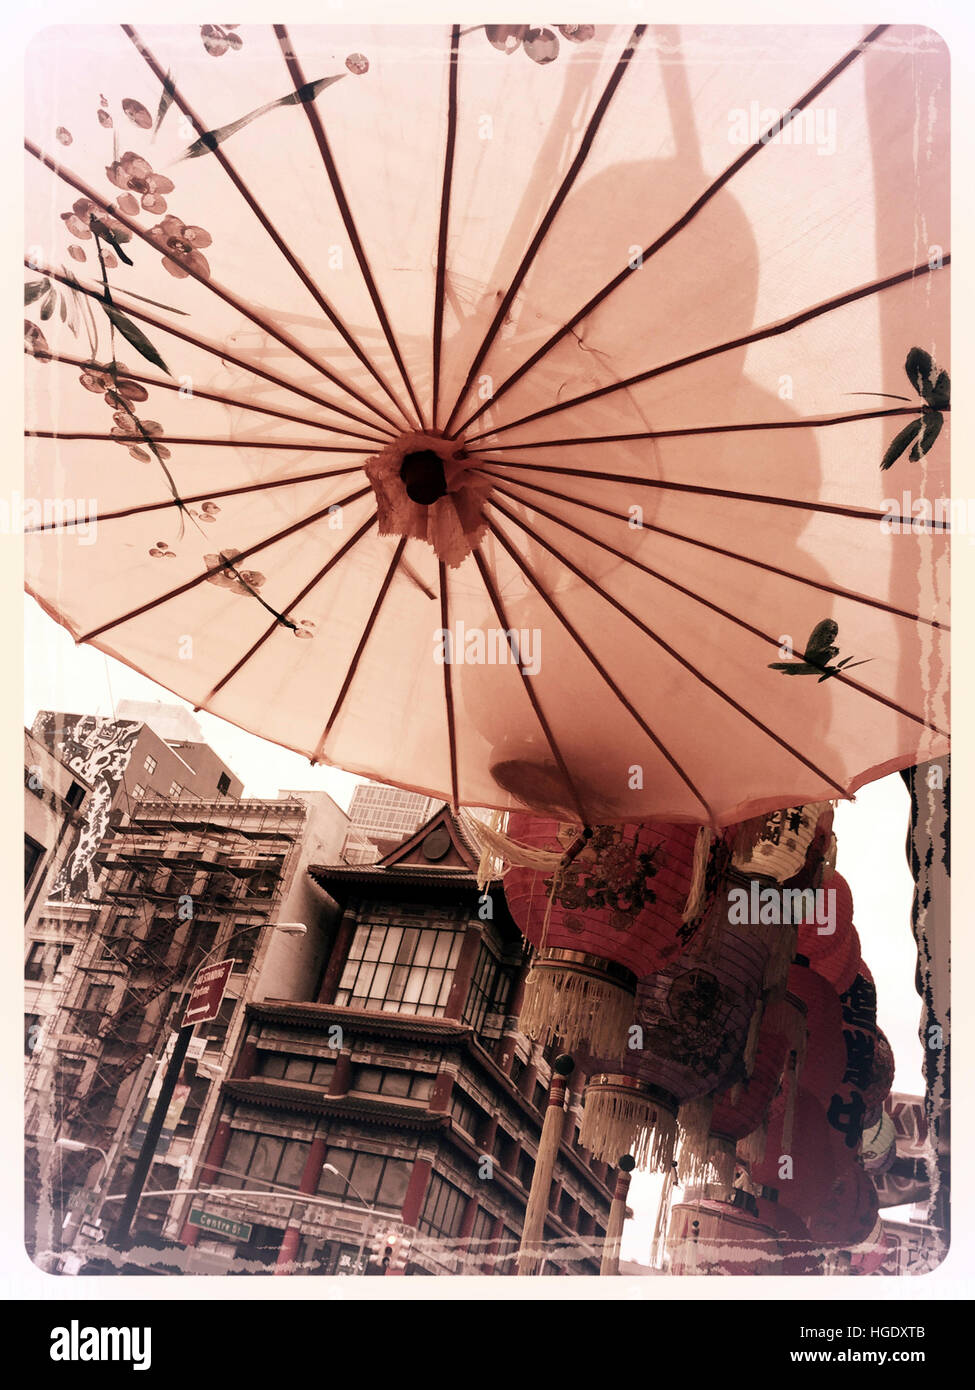 Souvenir Parasol Hanging outside Shop In Chinatown, NYC, USA Stock Photo -  Alamy